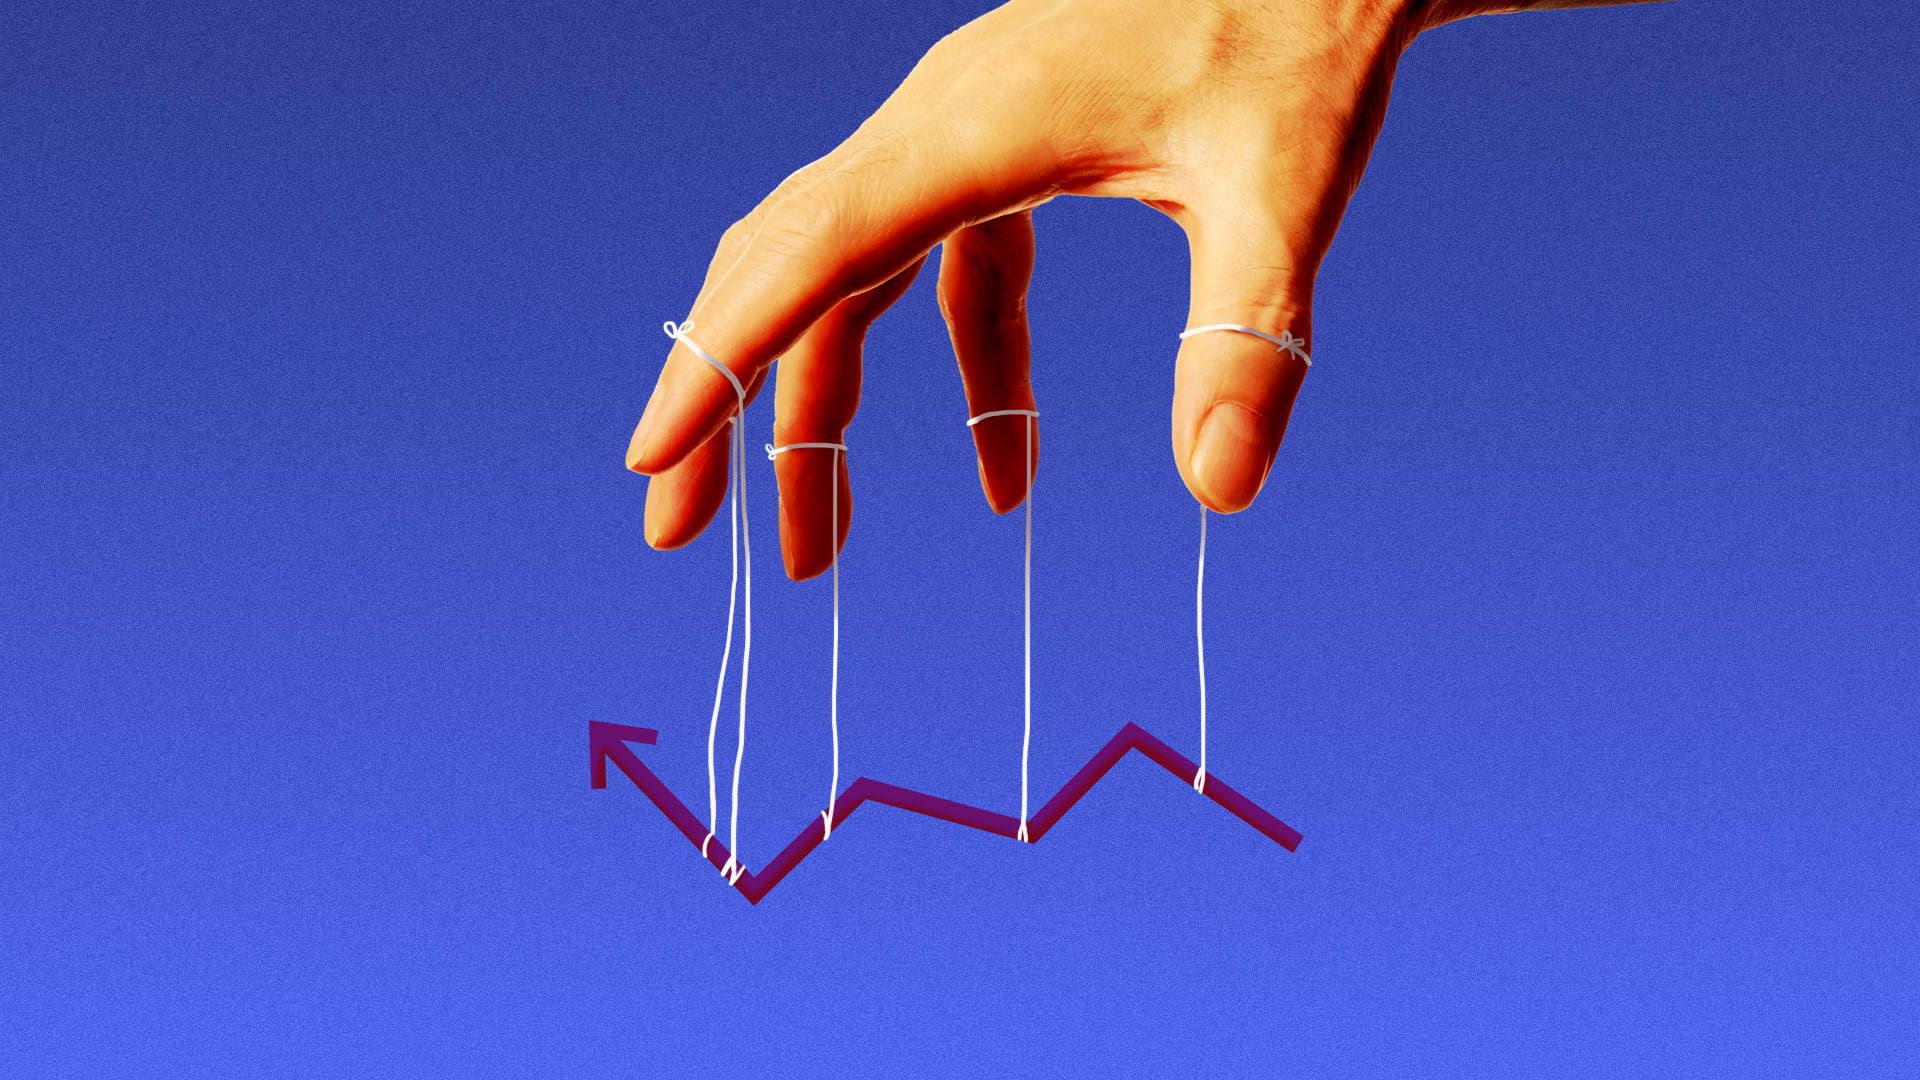 llustration of a hand with strings tied to the fingers, manipulating a market trend line